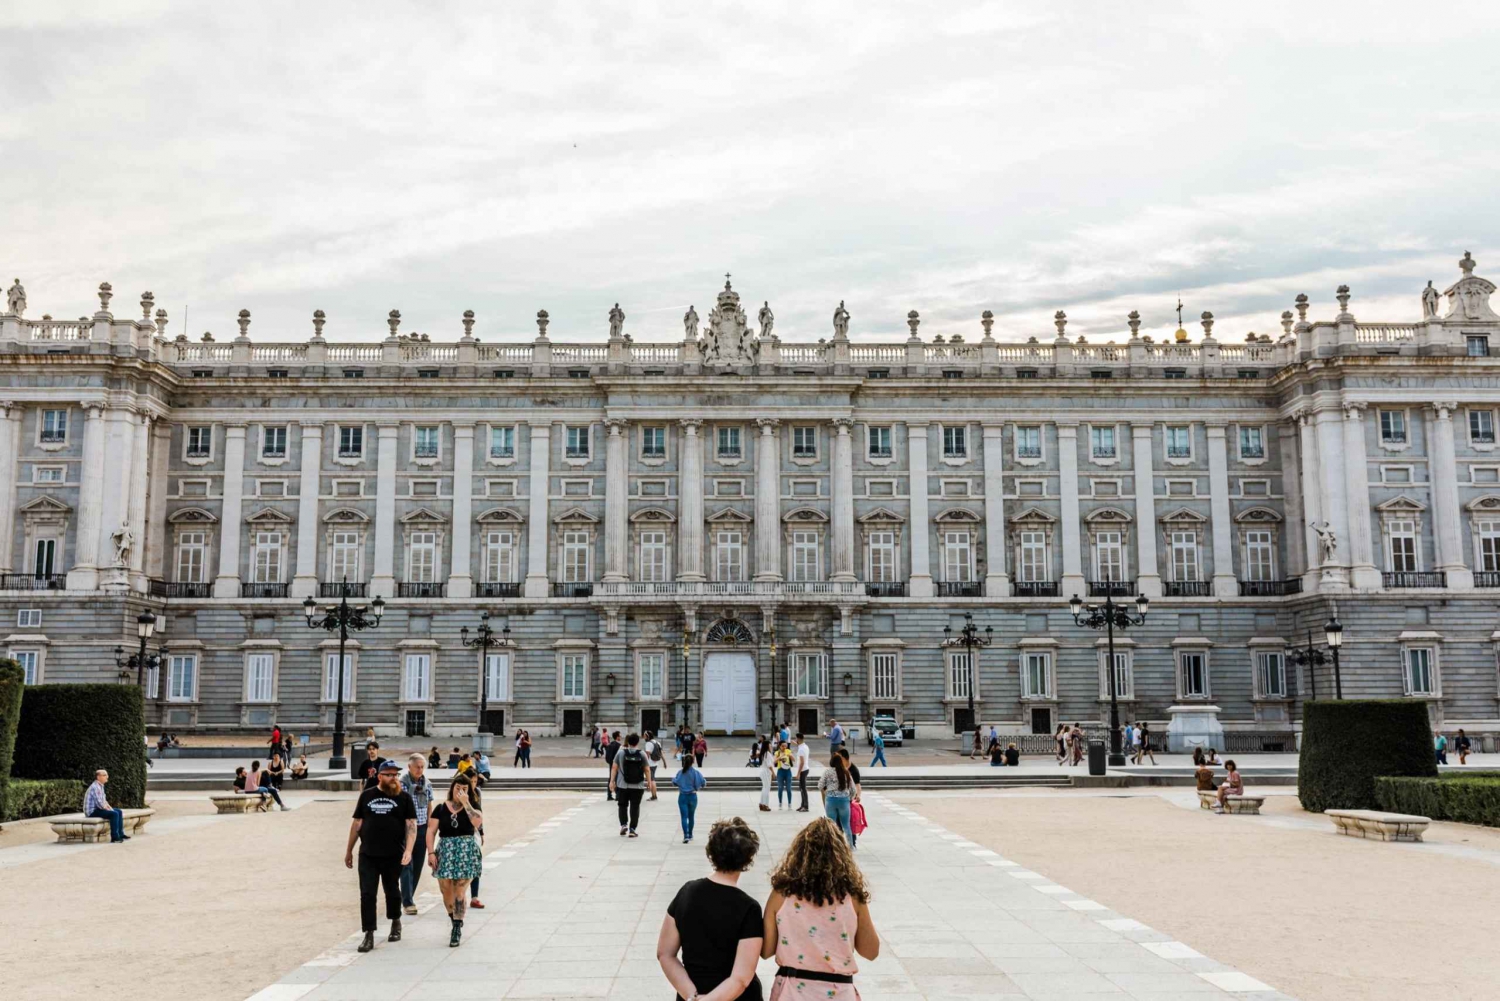 Private Customizable Madrid Tour With a Local